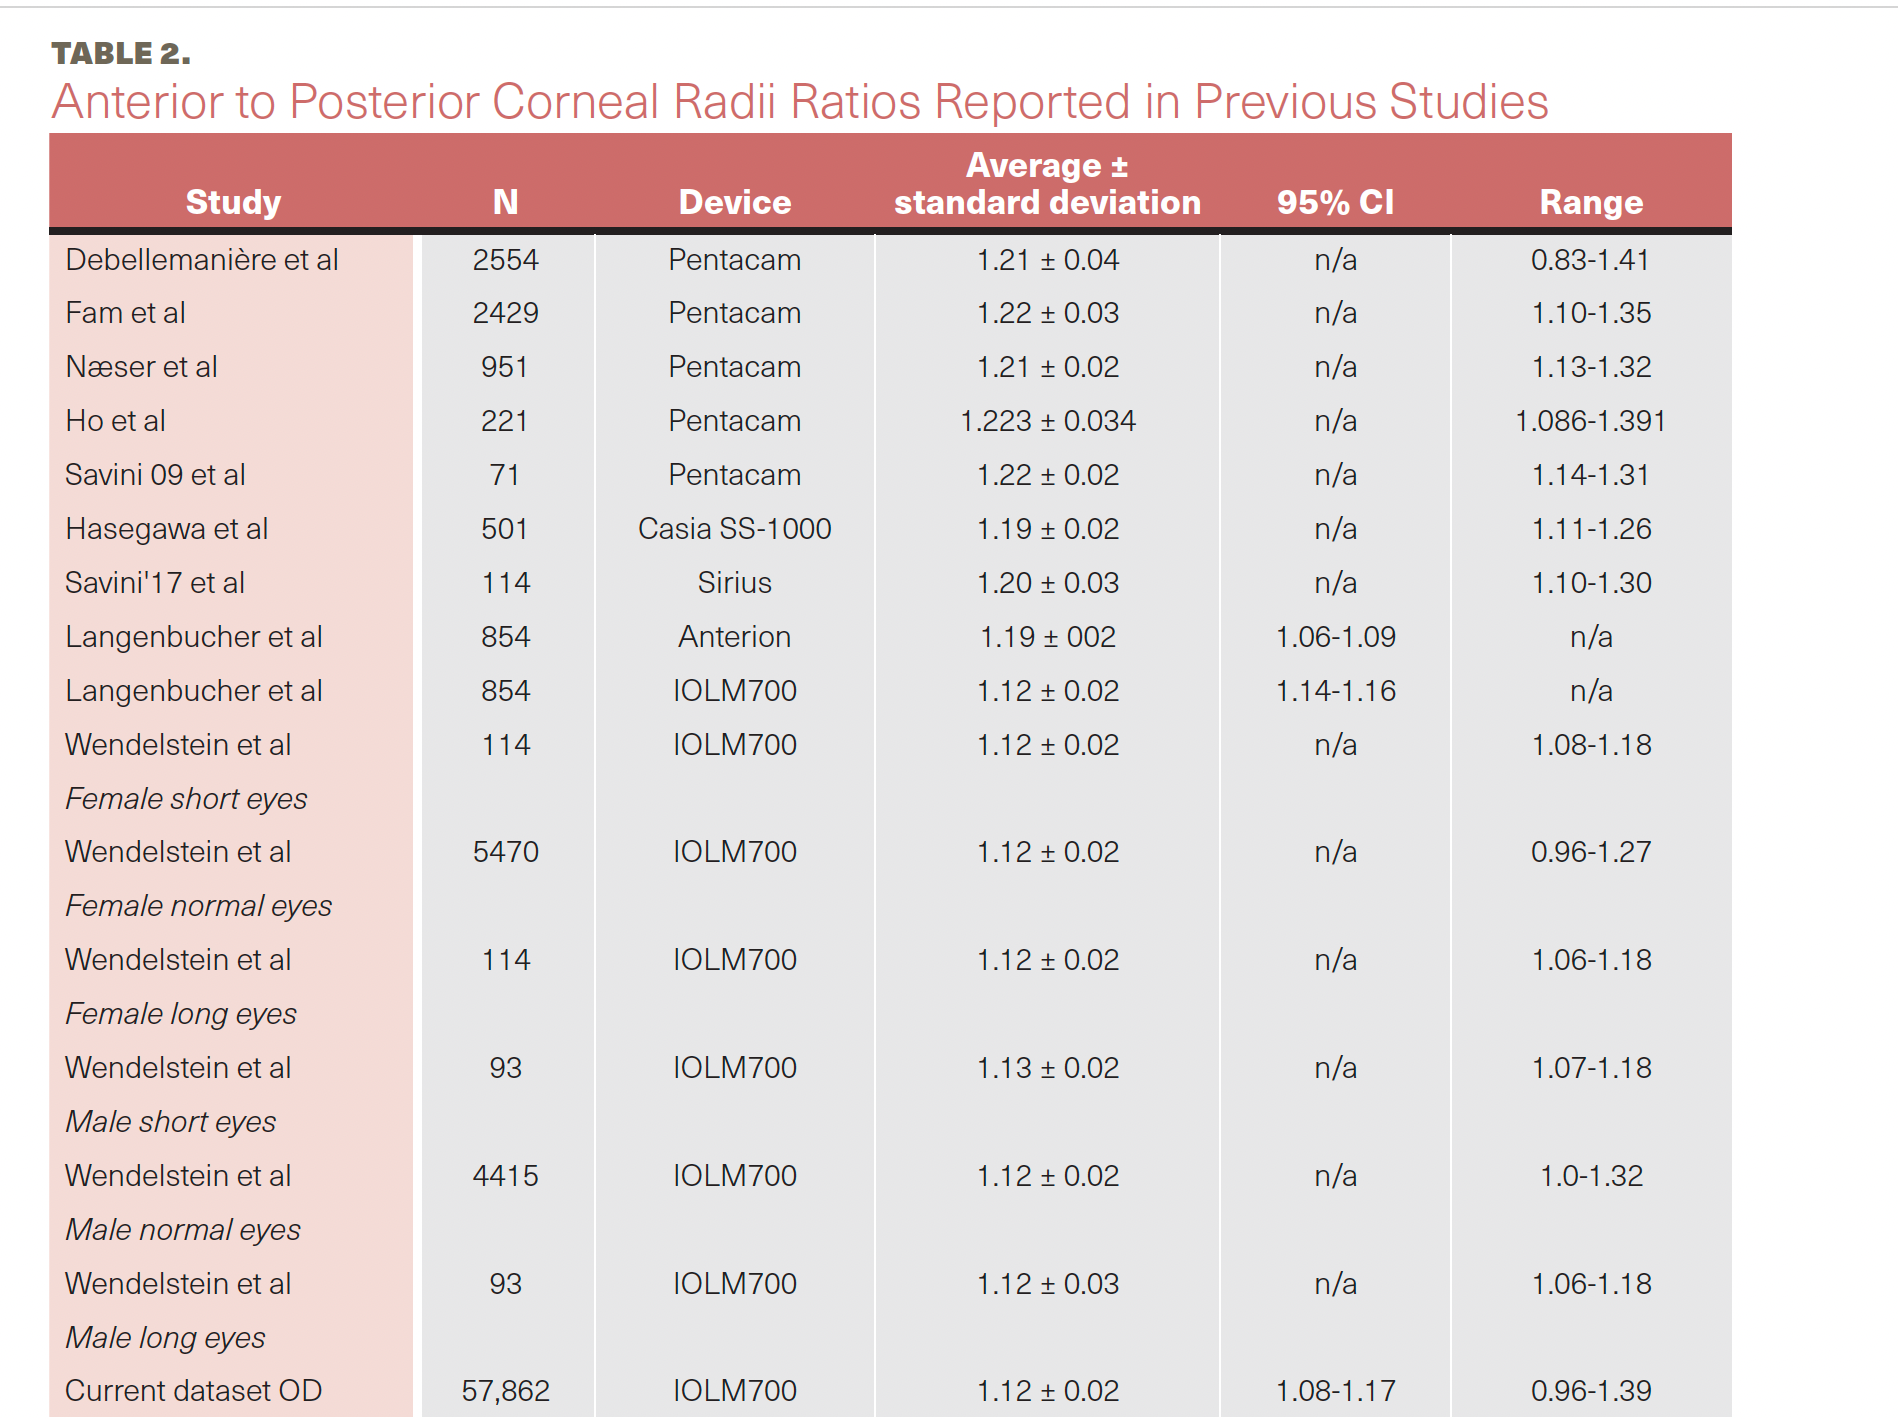 Table 2. Anterior to Posterior Corneal Radii Ratios Reported in Previous Studies